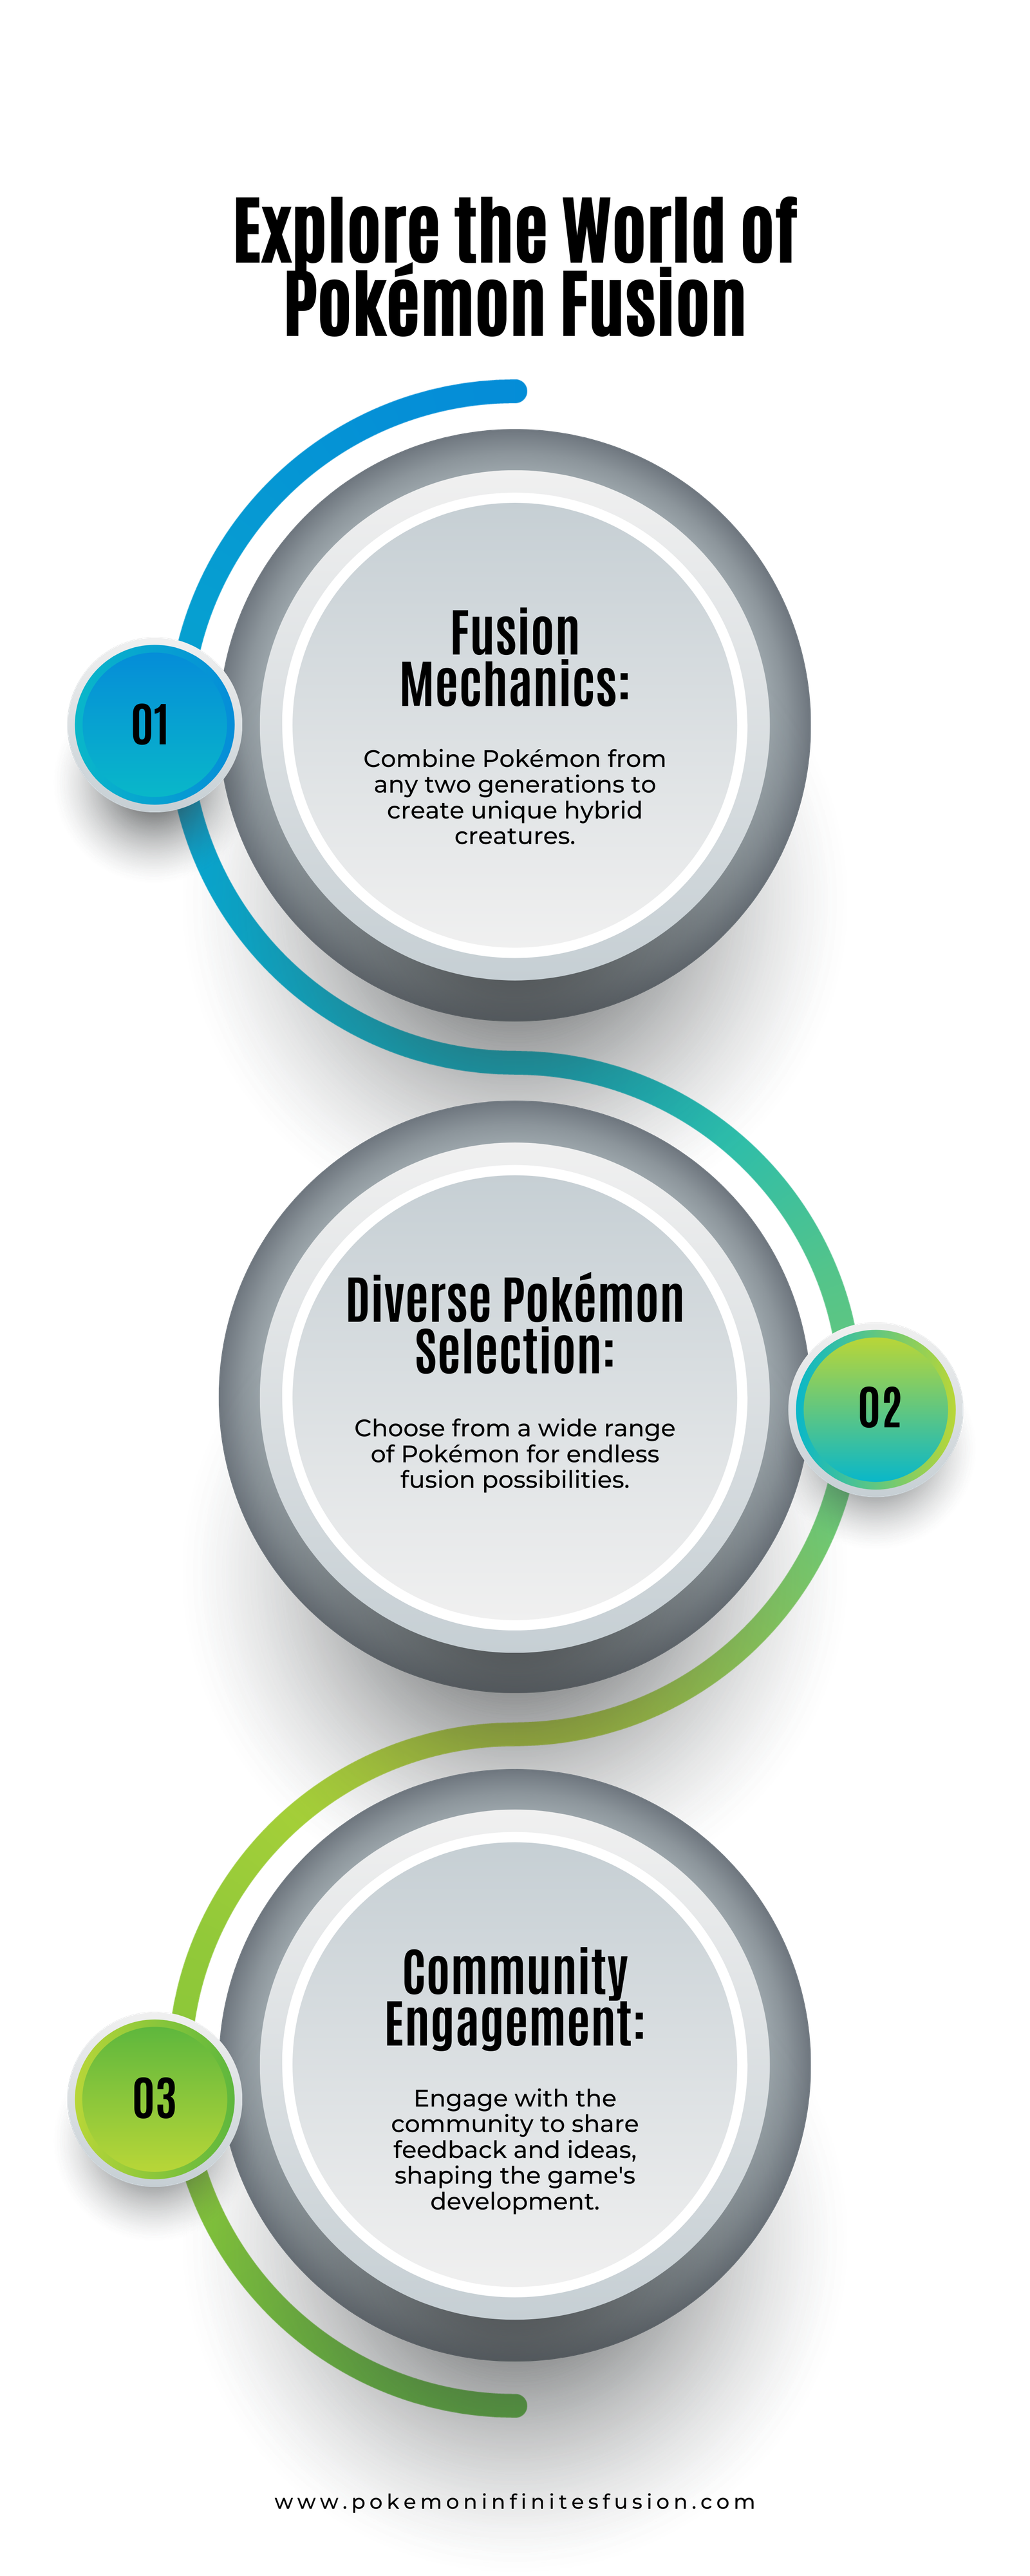 Explore the world of pokémon fusion: discover new hybrid creatures, enjoy a wide selection of pokémon combinations, and engage with an active community of fellow fans.